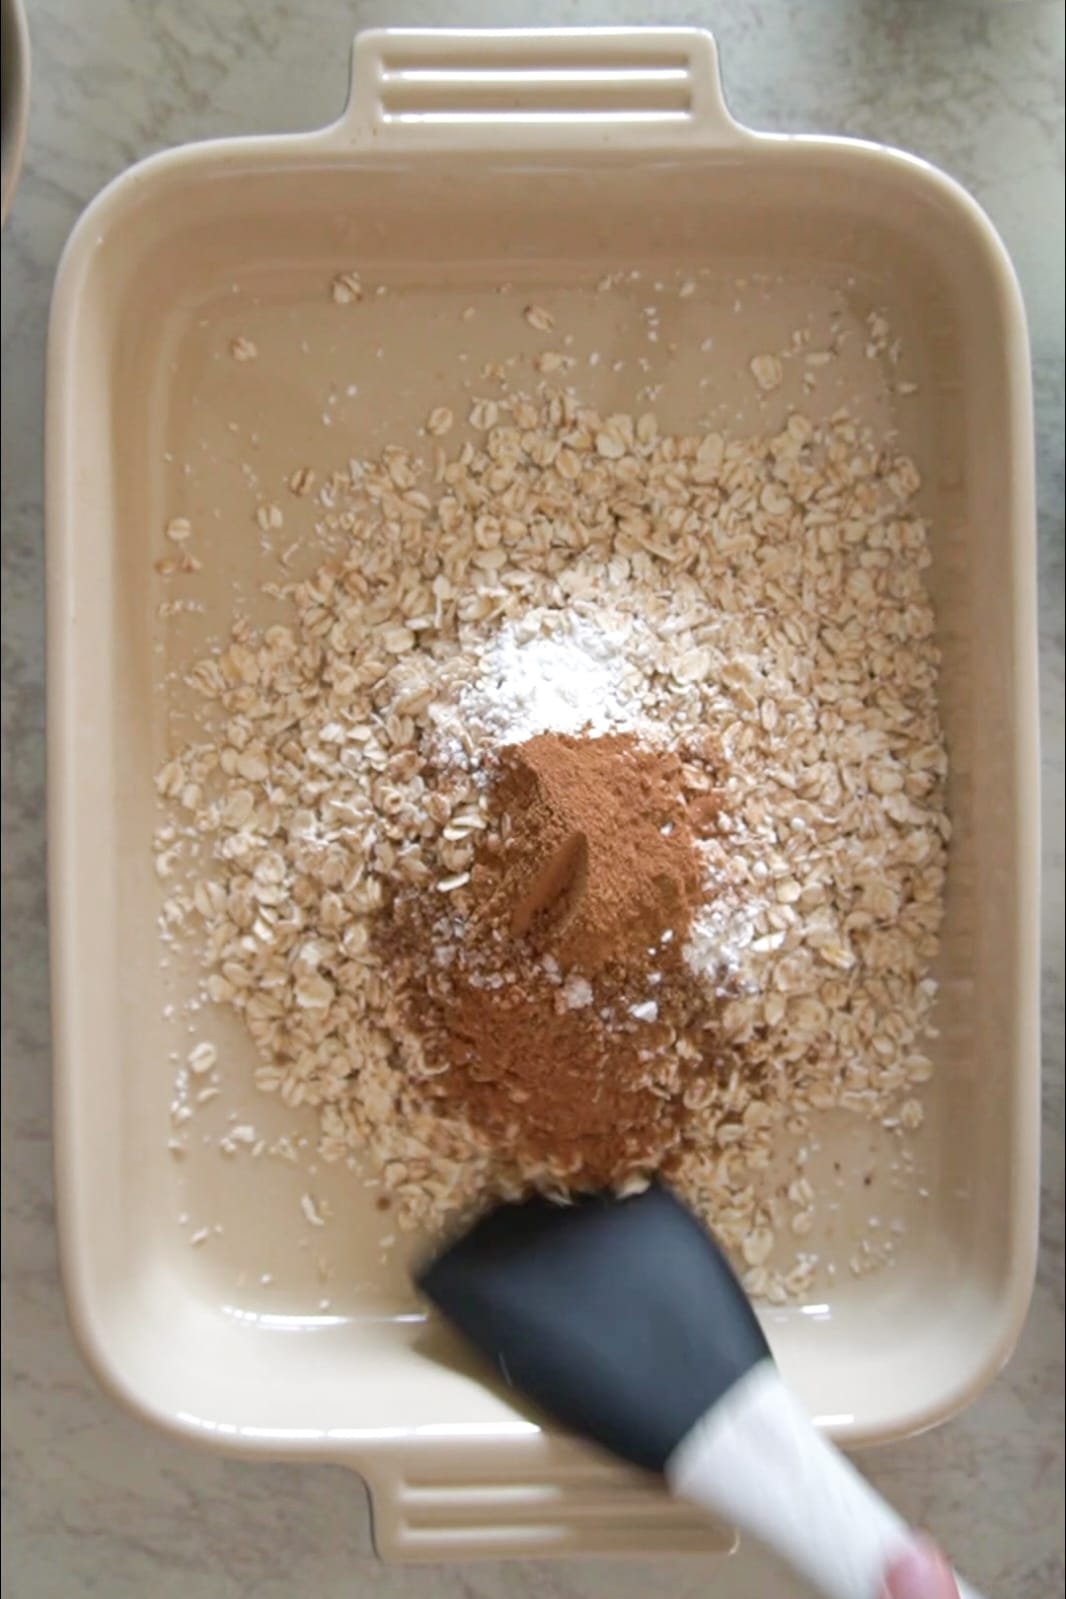 Start, by mixing your dry ingredients in the dish you will bake in.  Your dry ingredients are the oats, cinnamon, nutmeg, salt, ground flaxseed, and baking powder.